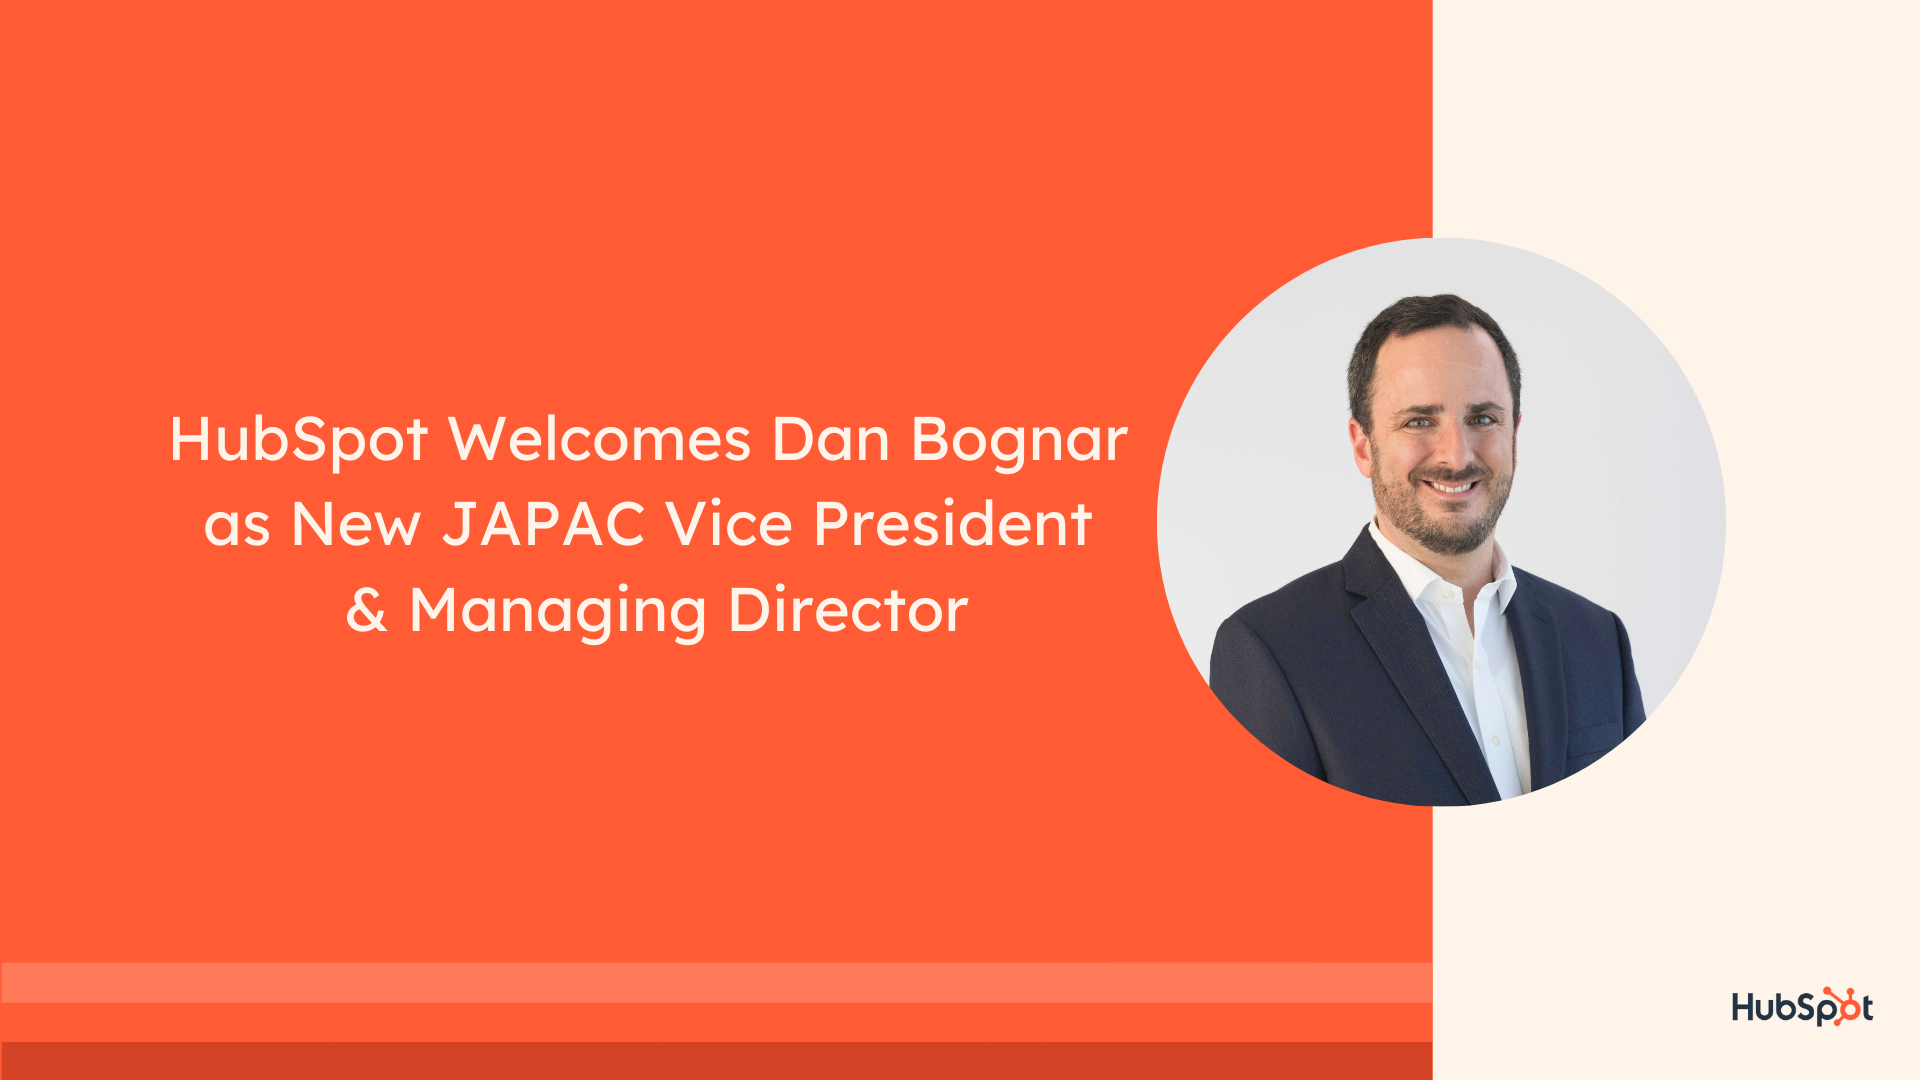 HubSpot welcomes Dan Bognar as Vice President of Sales & Managing Director for the JAPAC region. 